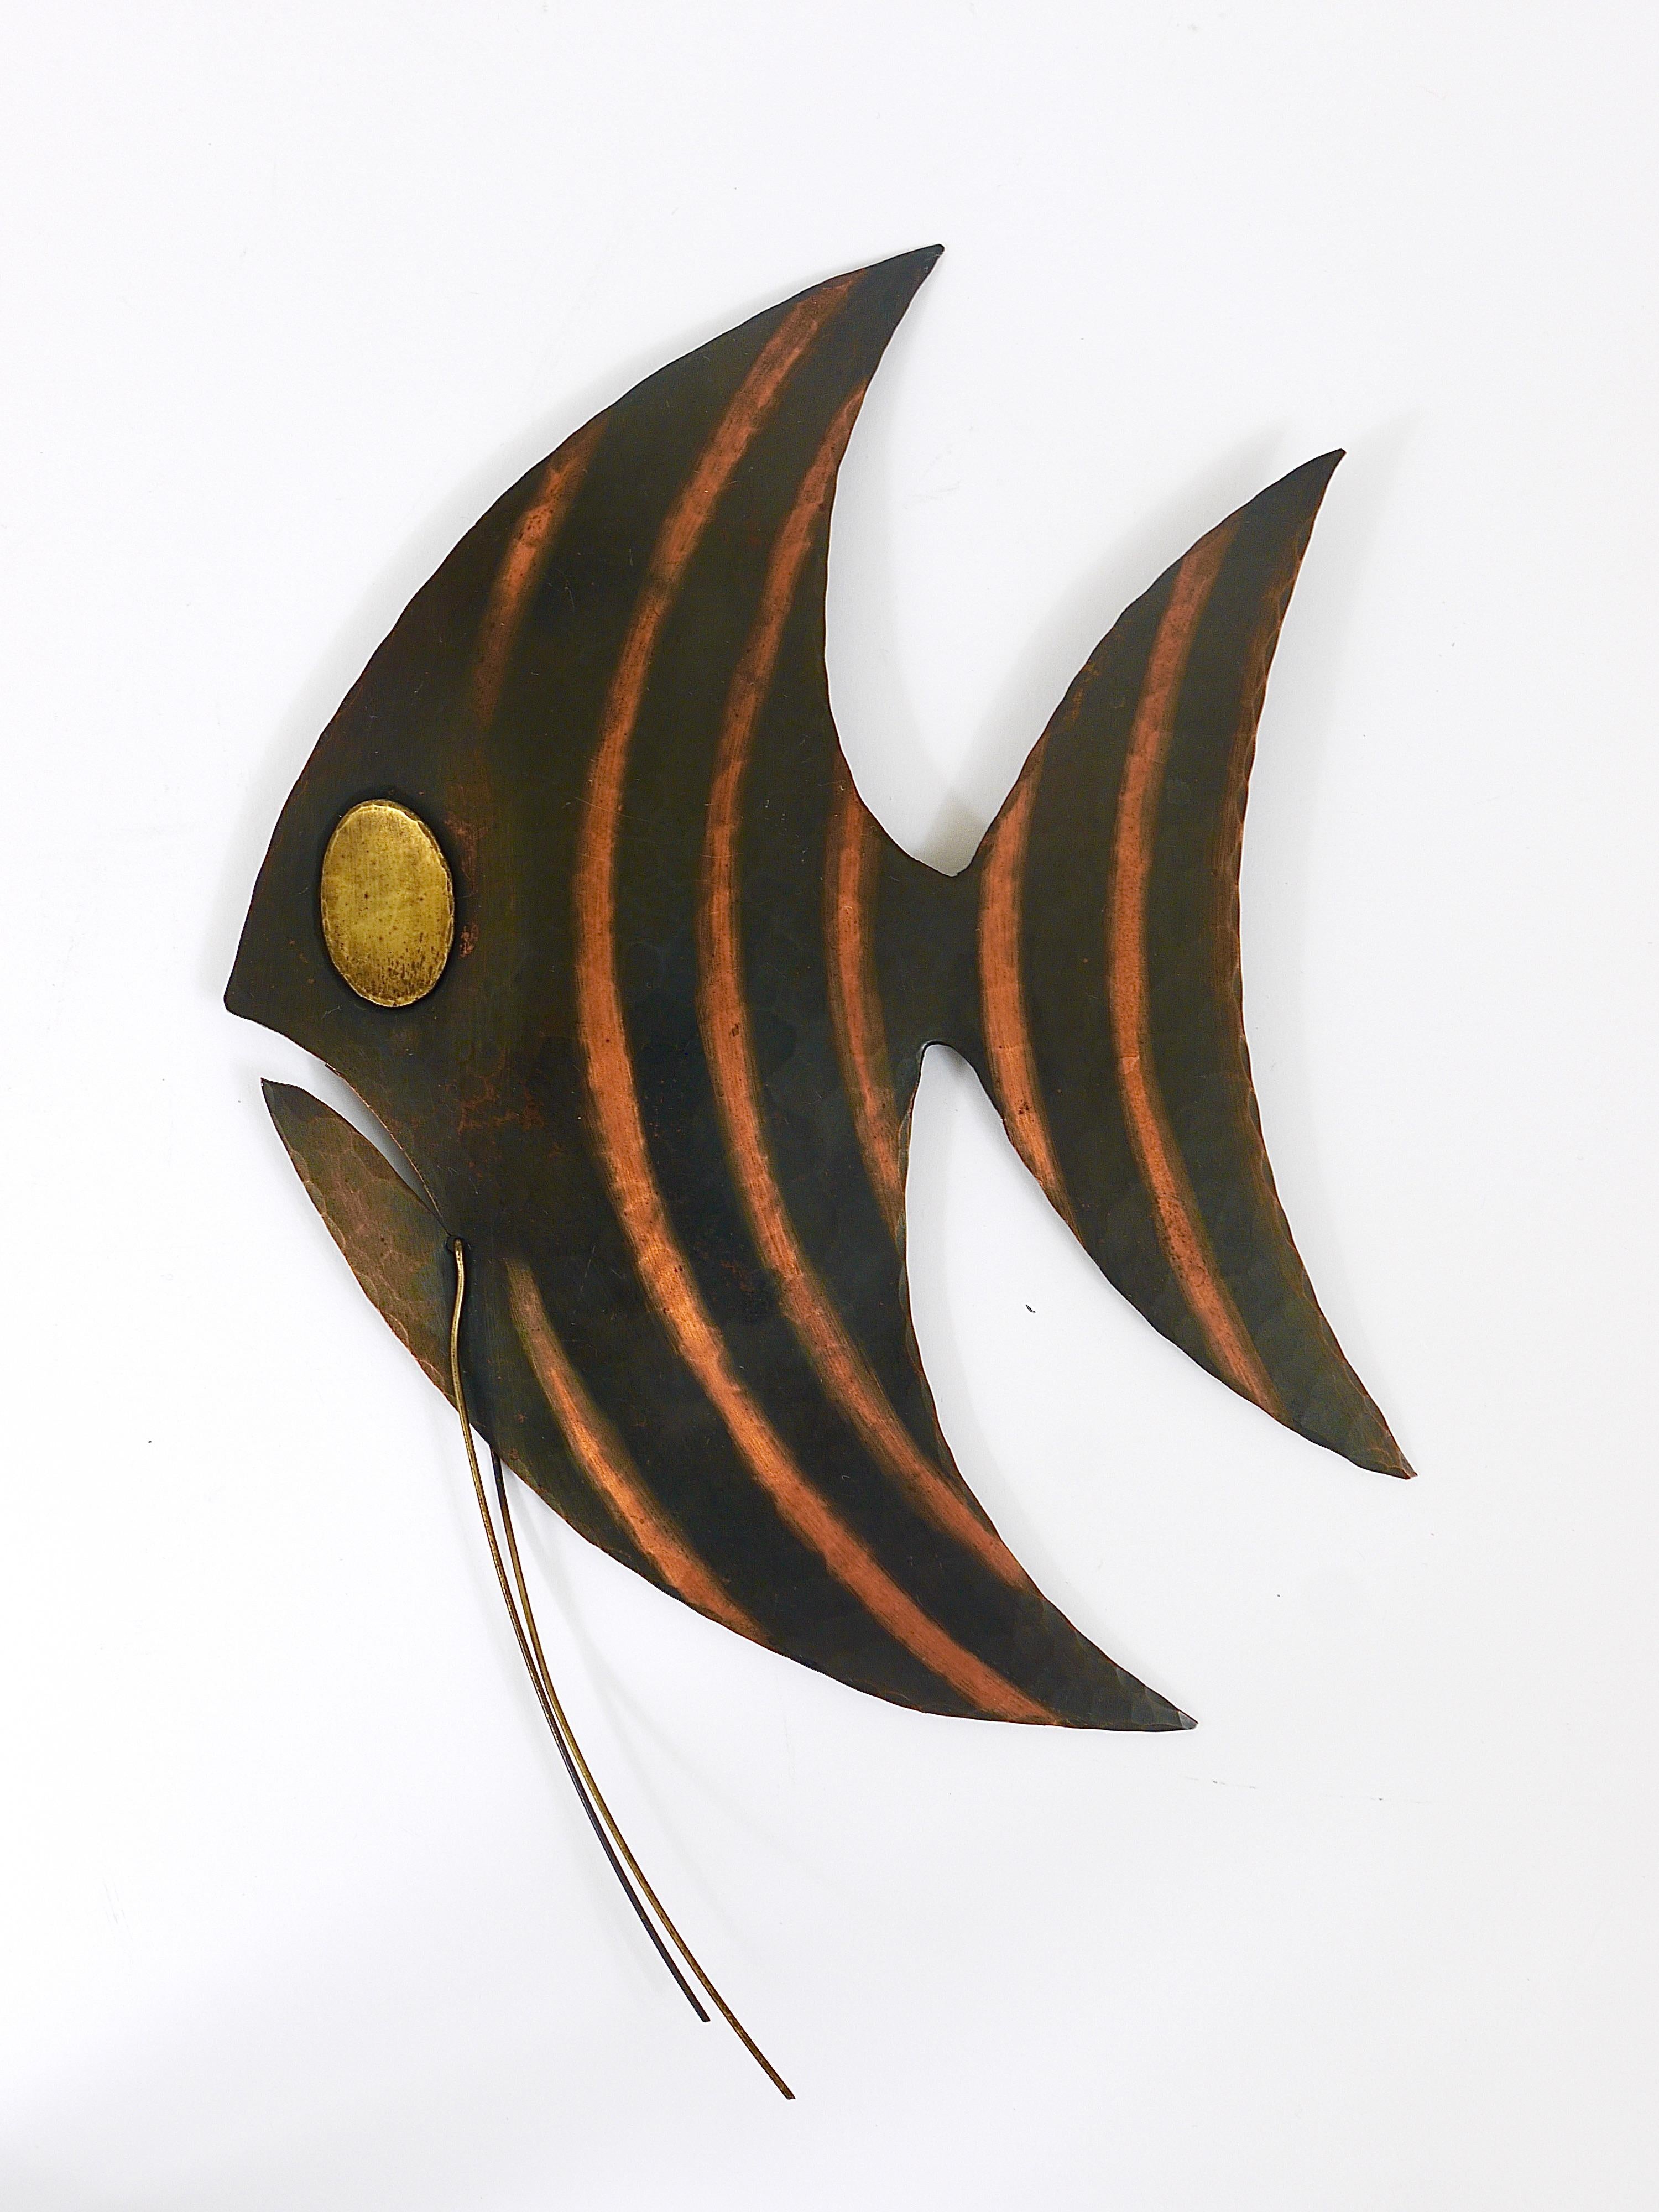 Midcentury Hammered Angel Fish Wall Plaque Sculpture, Copper, Austria, 1950s In Good Condition For Sale In Vienna, AT